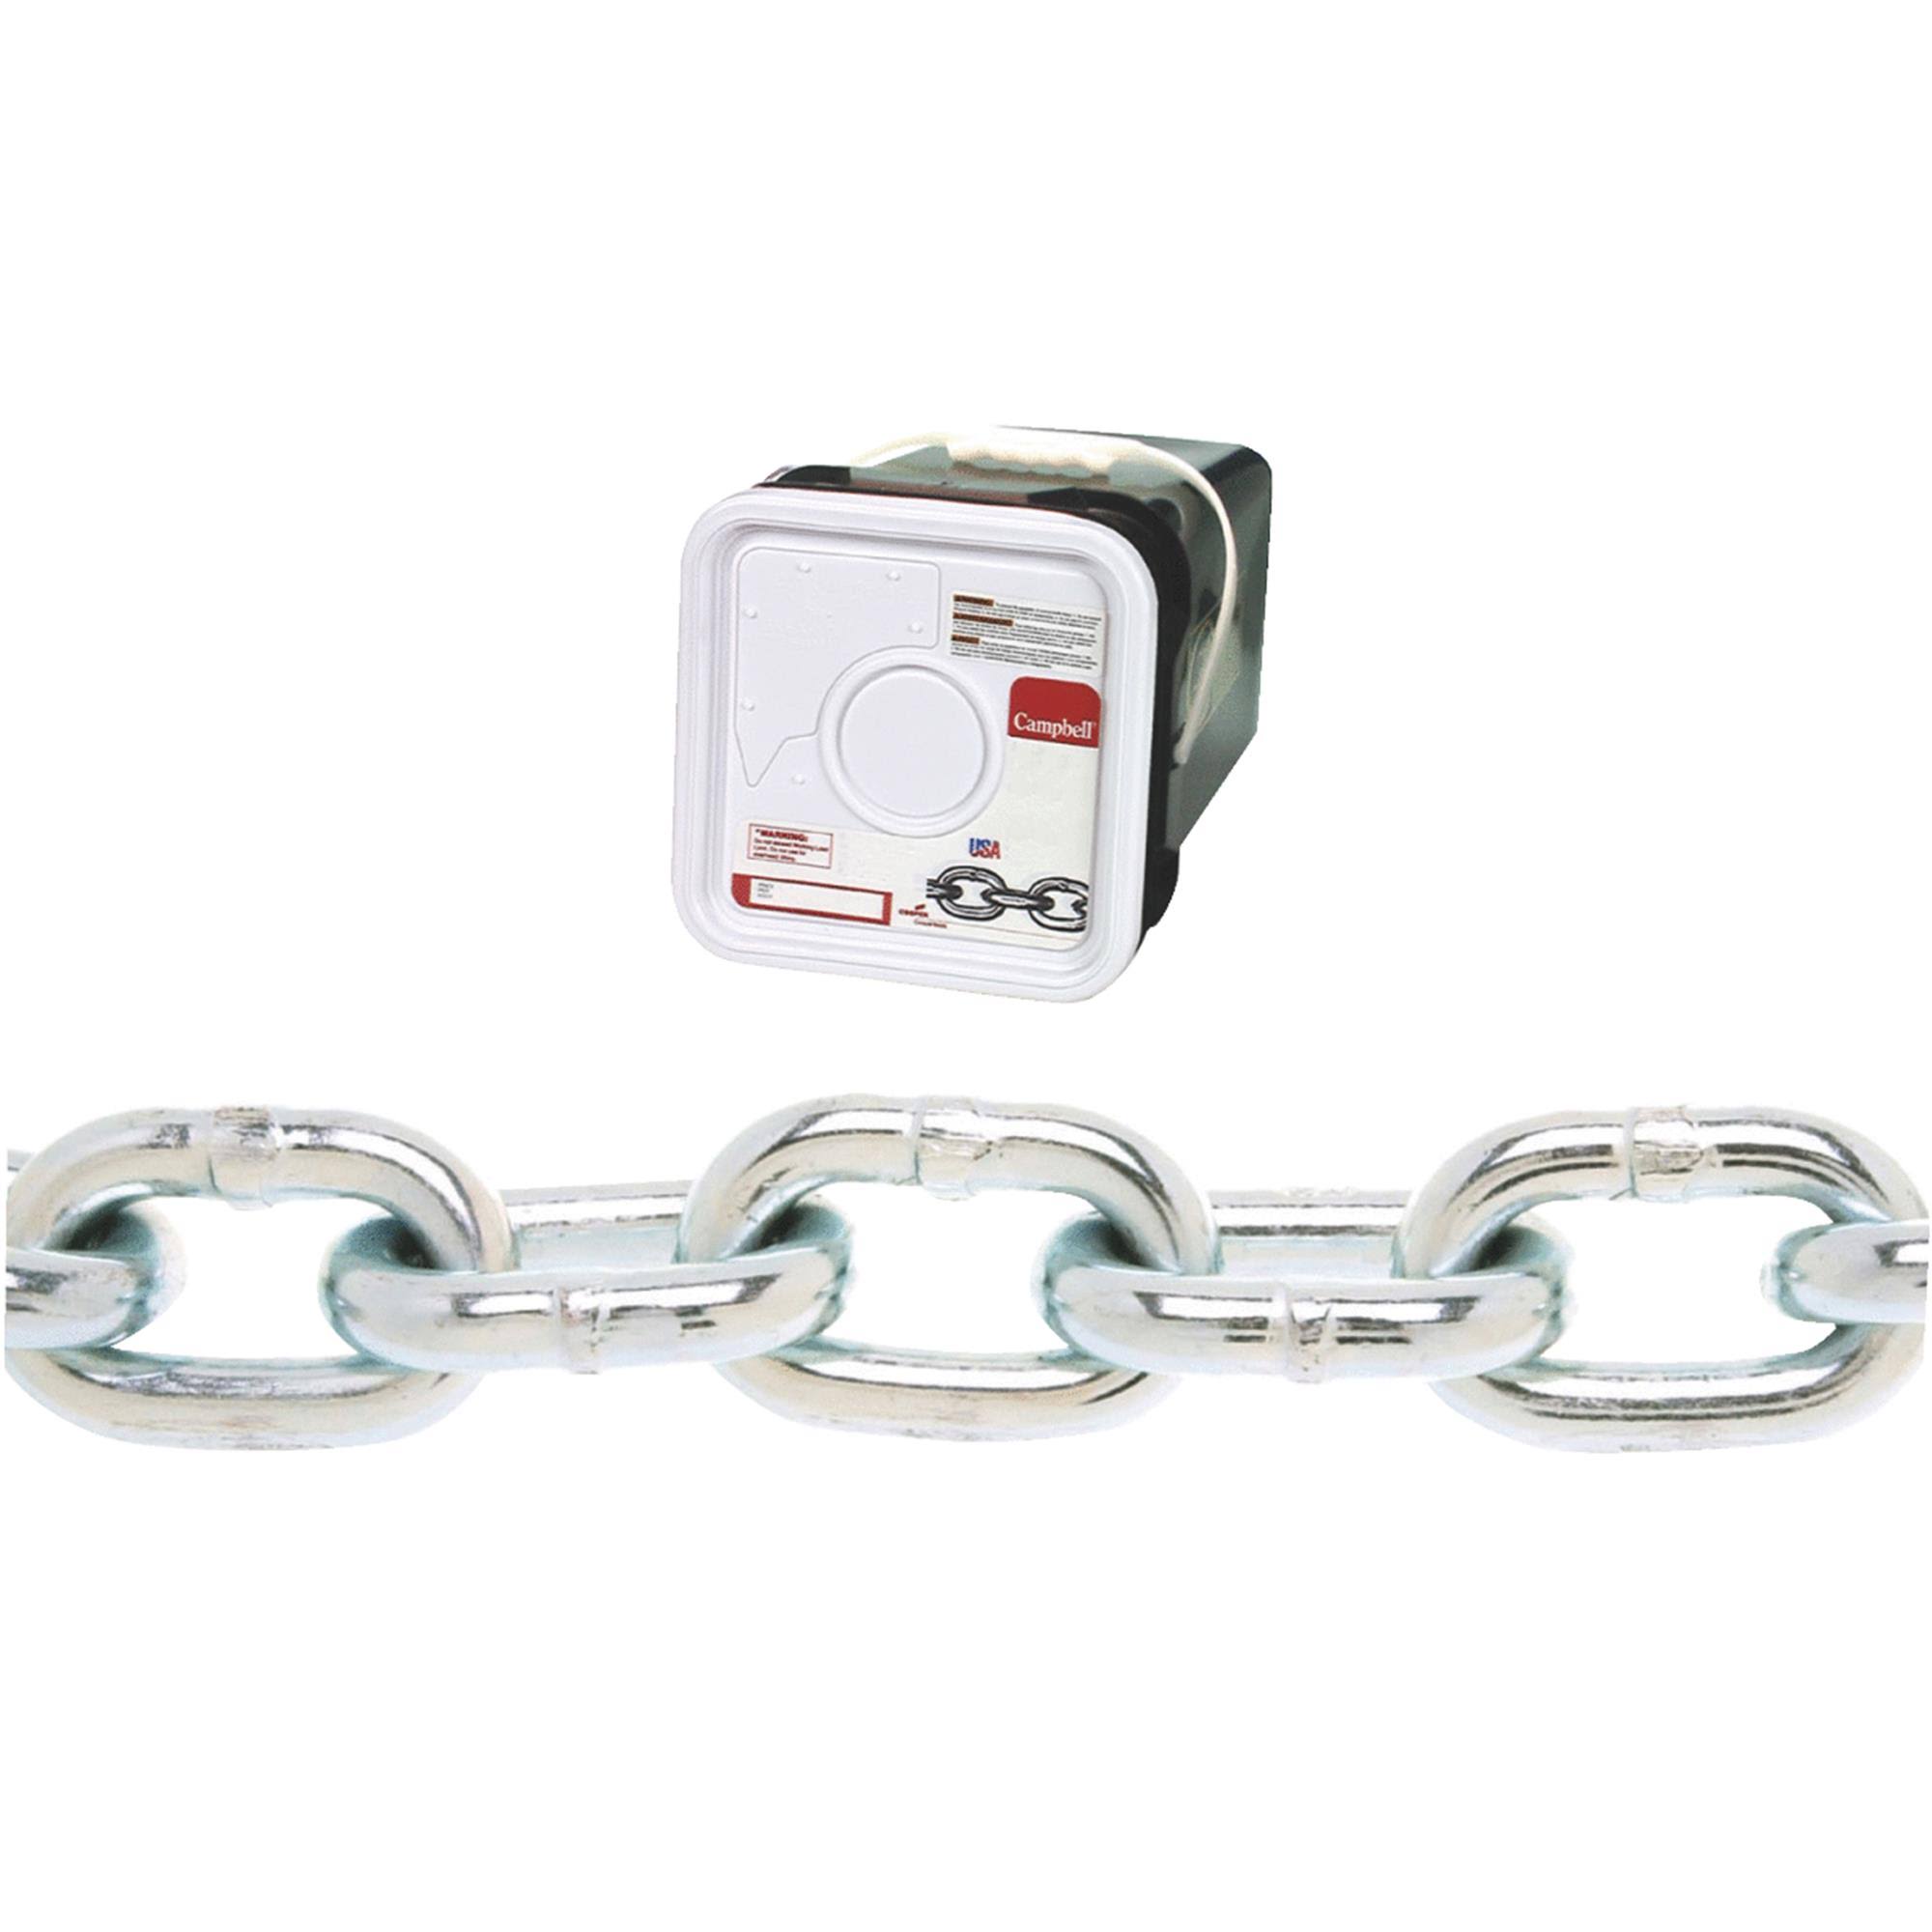 Campbell Chain Chain Proof Coil